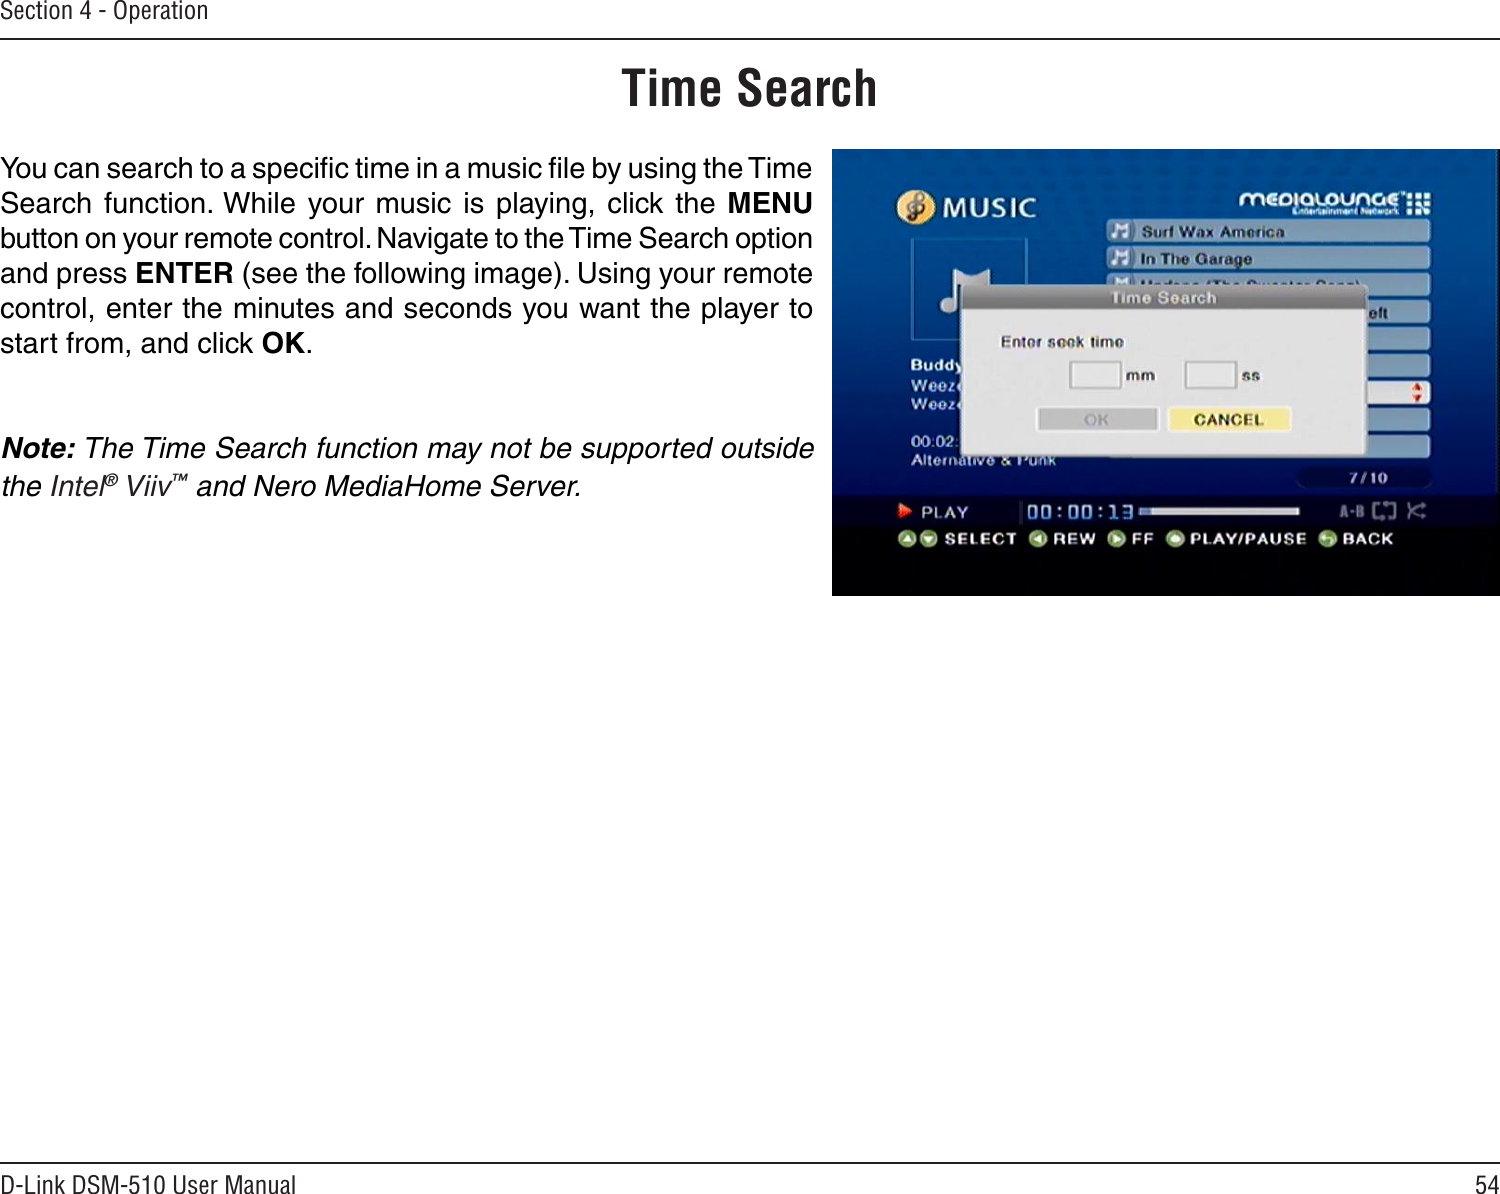 54D-Link DSM-510 User ManualSection 4 - OperationTime SearchYou can search to a speciﬁc time in a music ﬁle by using the Time Search  function. While  your music is  playing, click  the  MENU button on your remote control. Navigate to the Time Search option and press ENTER (see the following image). Using your remote control, enter the minutes and seconds you want the player to start from, and click OK.Note: The Time Search function may not be supported outside the Intel® Viiv™ and Nero MediaHome Server.